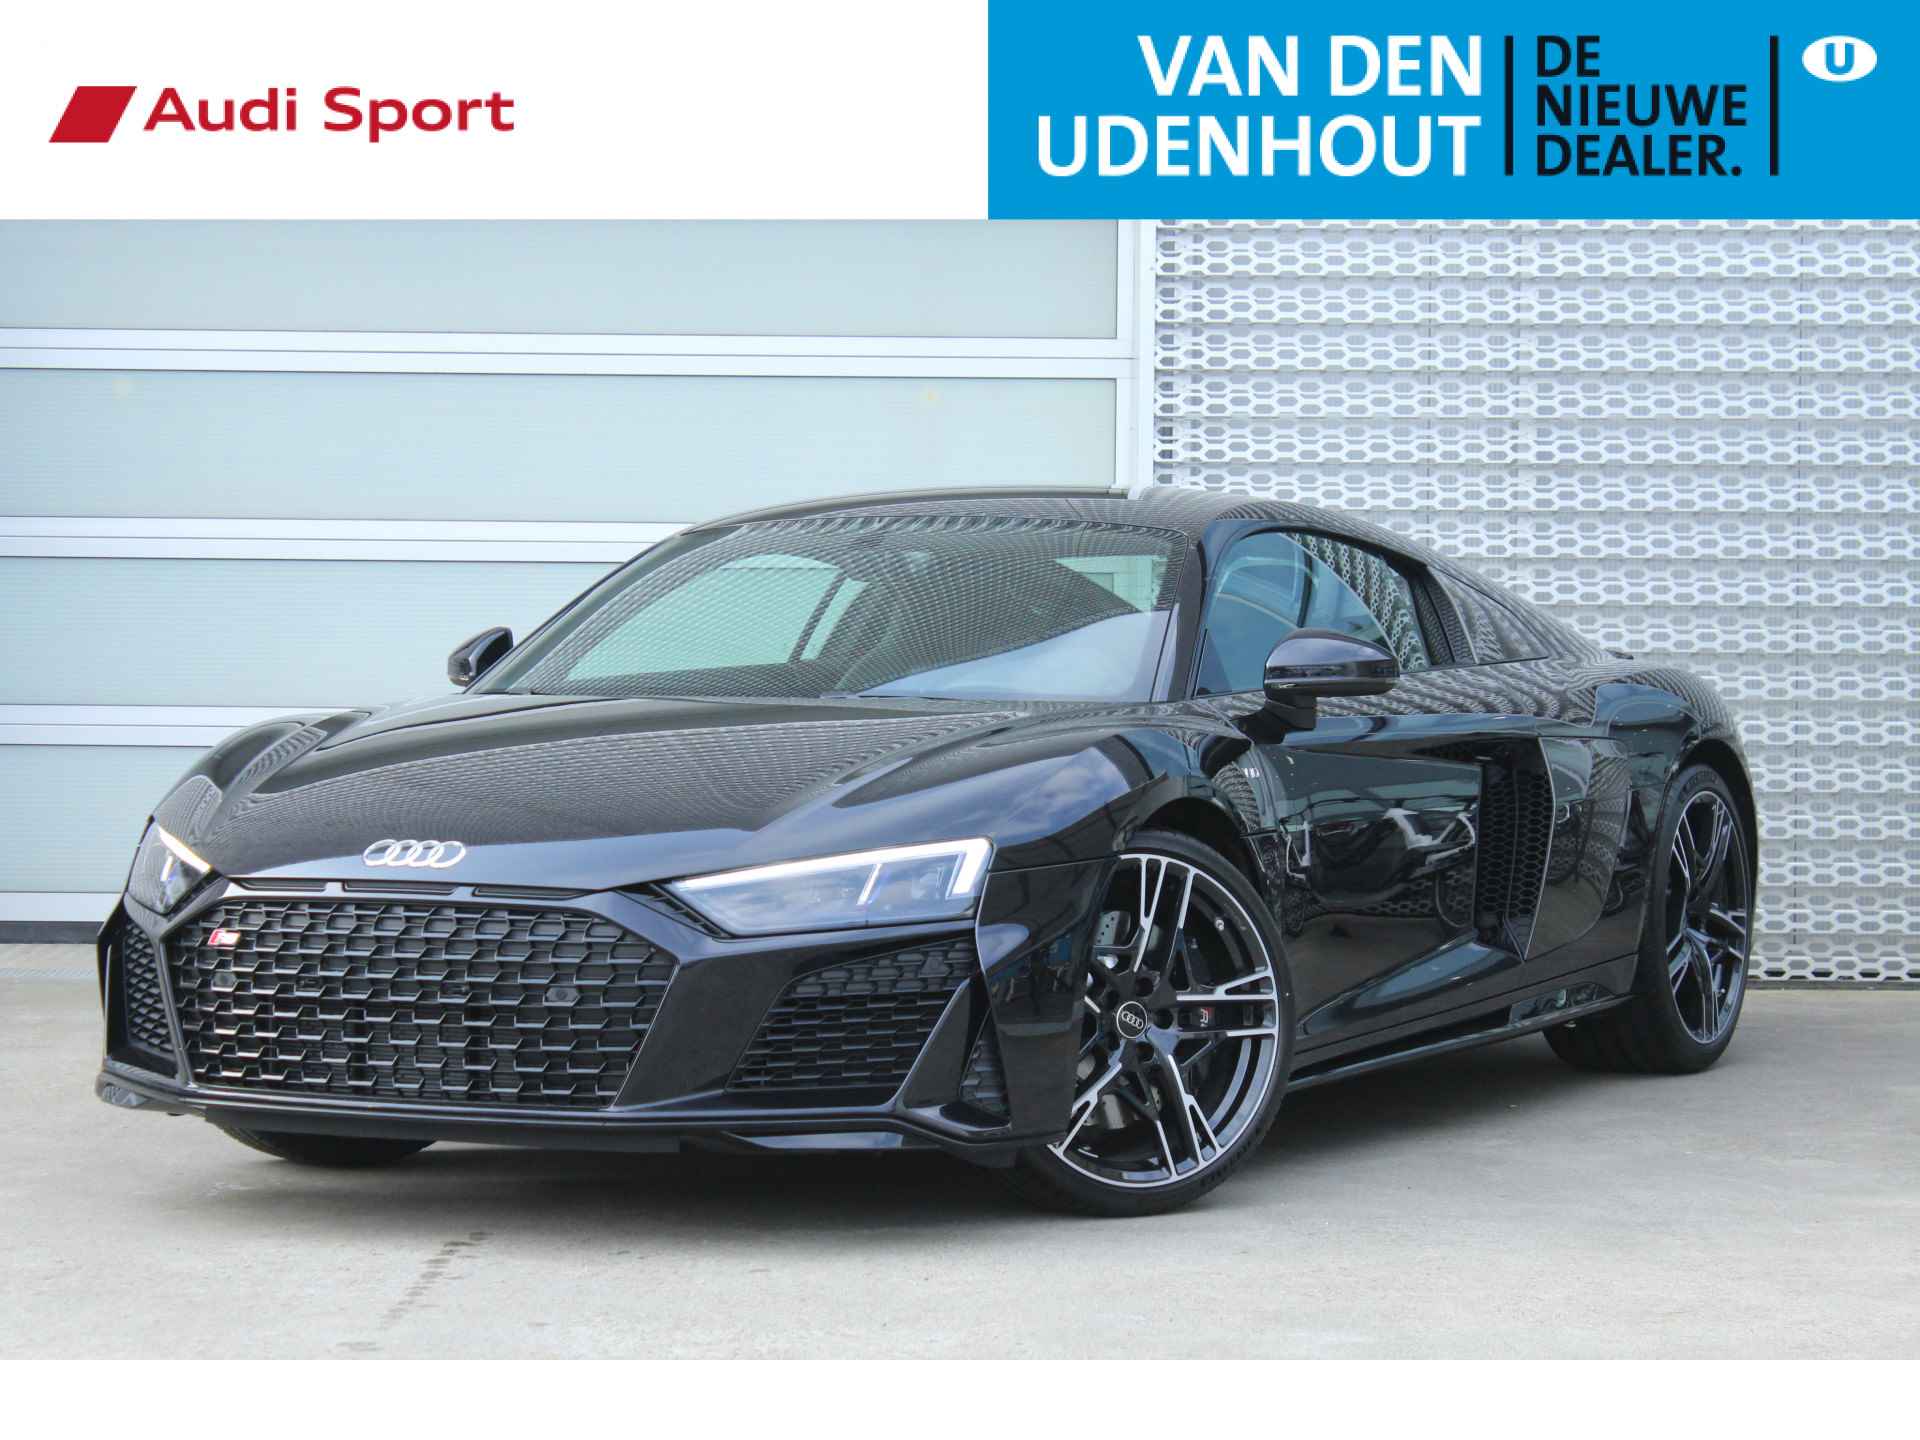 Audi R8 Coupe R8 Coupe 5.2 419 kW / 570 pk FSI Coupe 7 versn. S-tronic - 1/61